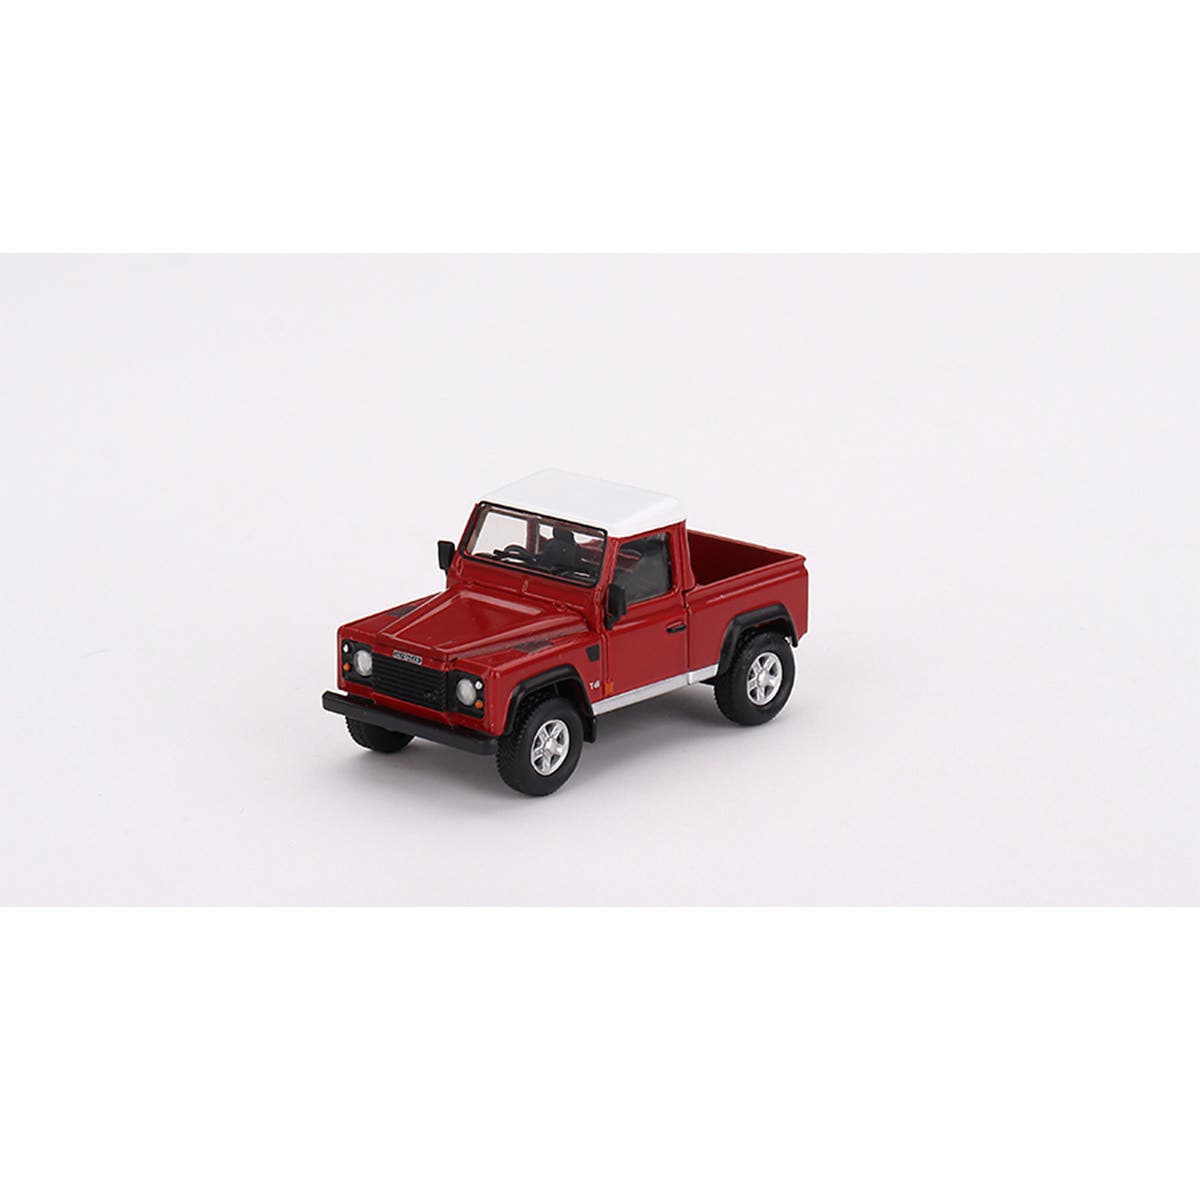 Land Rover Defender 90 Pickup Masai Red - 1:64 Scale Diecast  Model Car